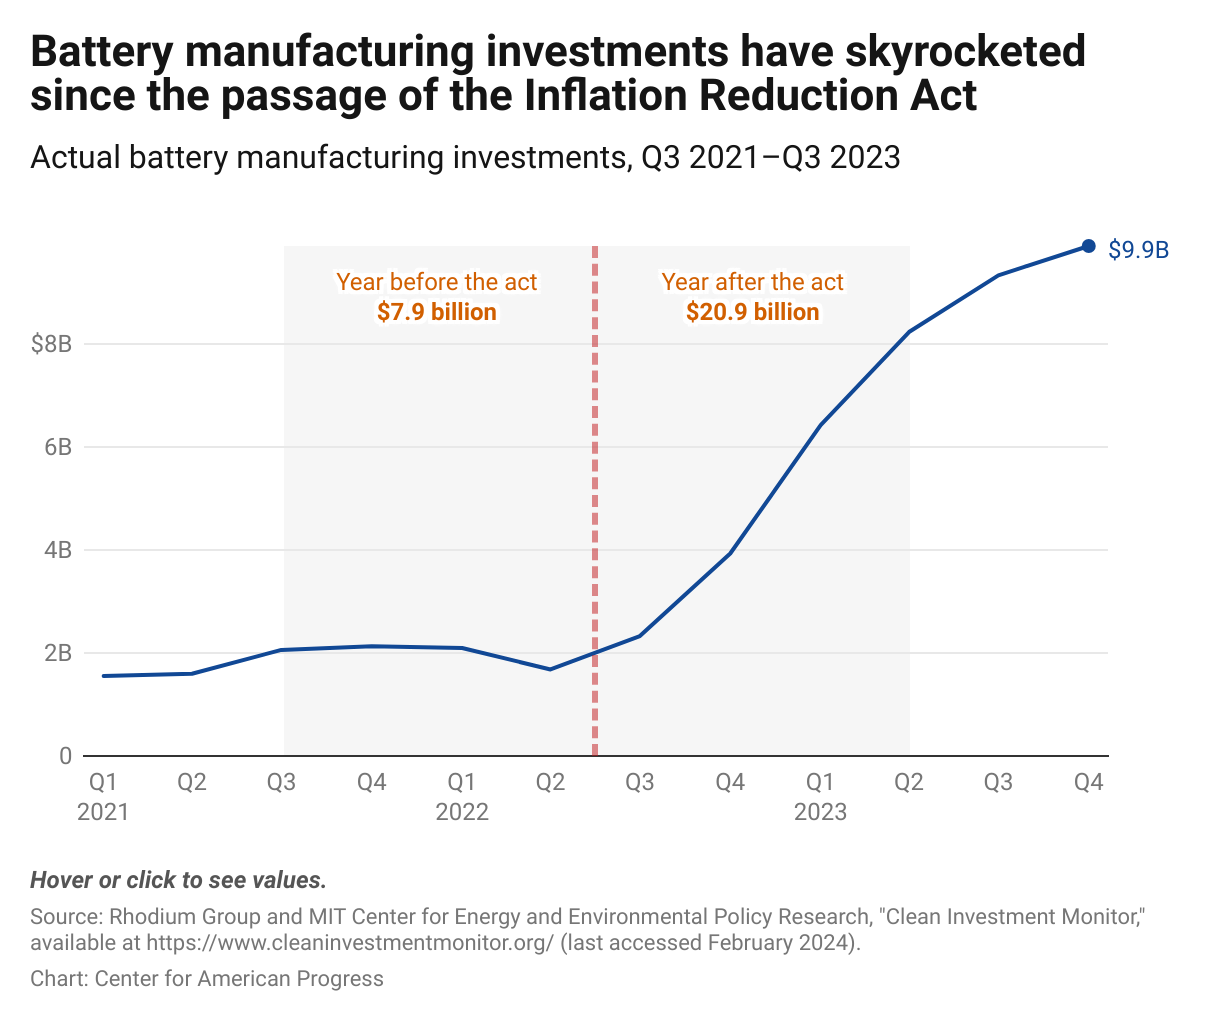 Bar chart showing that quarterly investments in battery began sharply increasing after Q2 2022 when the Inflation Reduction Act was passed. 